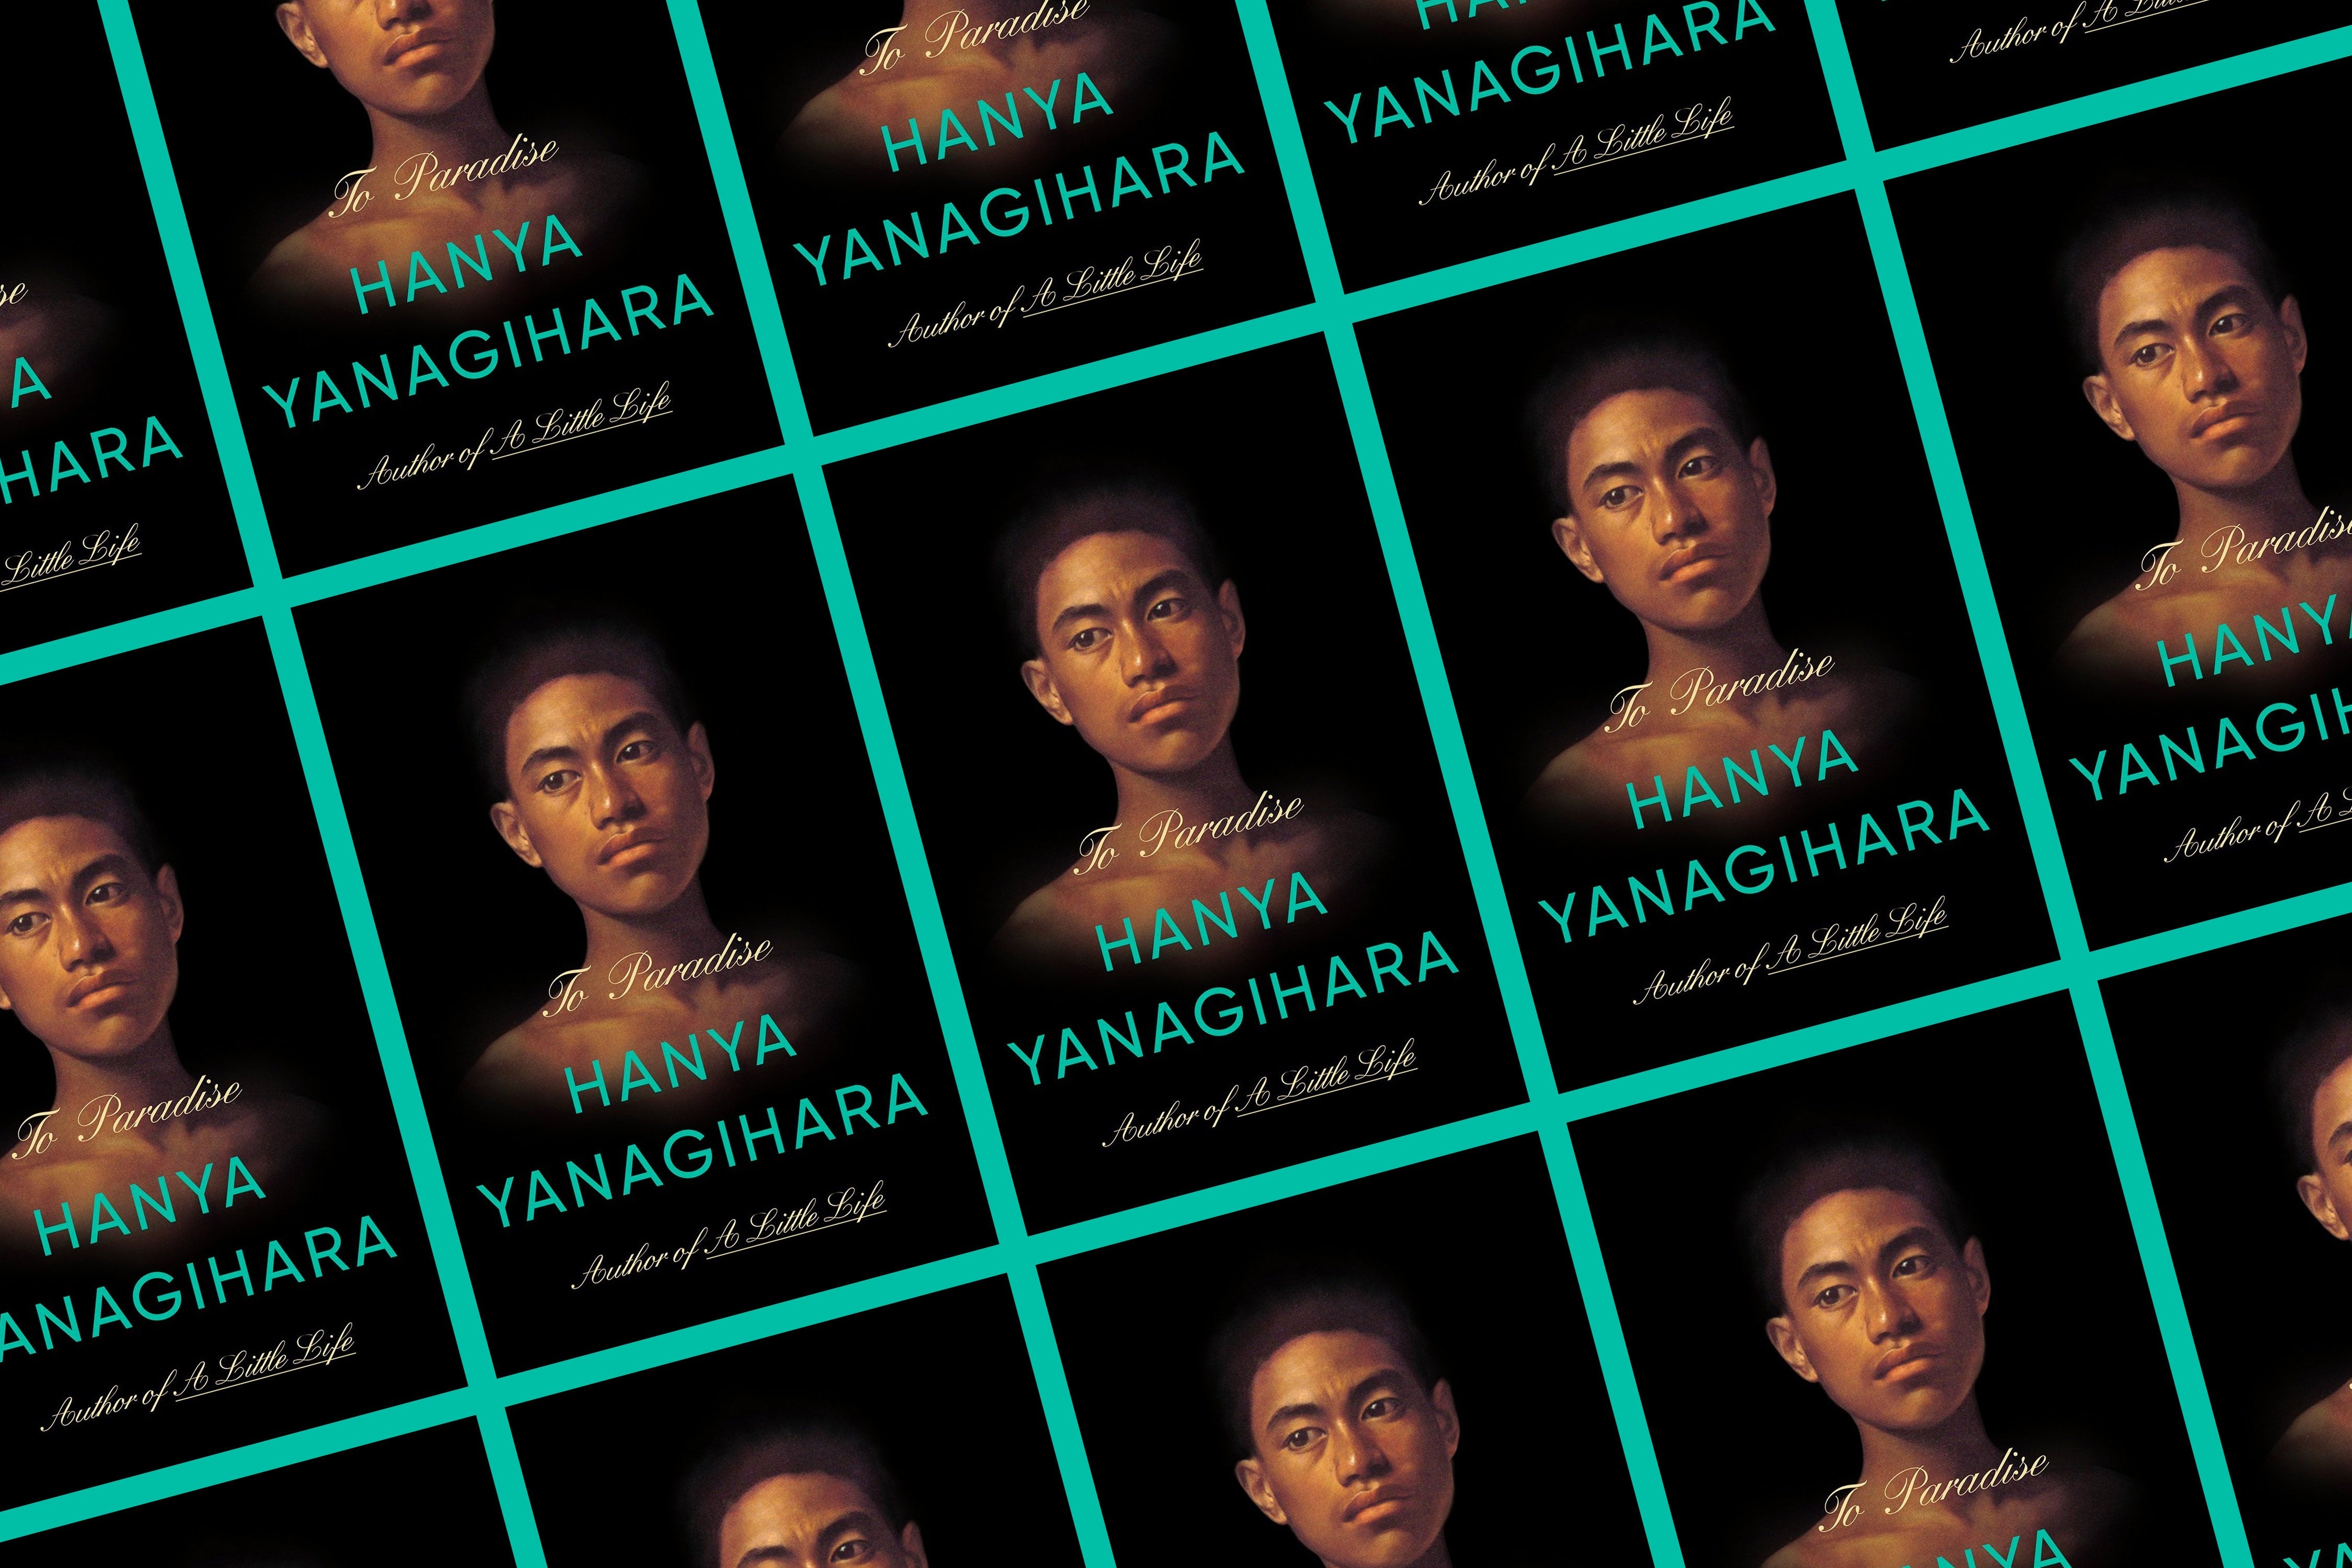 The cover of To Paradise, tiled. The cover shows a painting of a young, possibly Hawaiian man, against black. Below it says "Hanya Yanagihara, author of A Little Life."